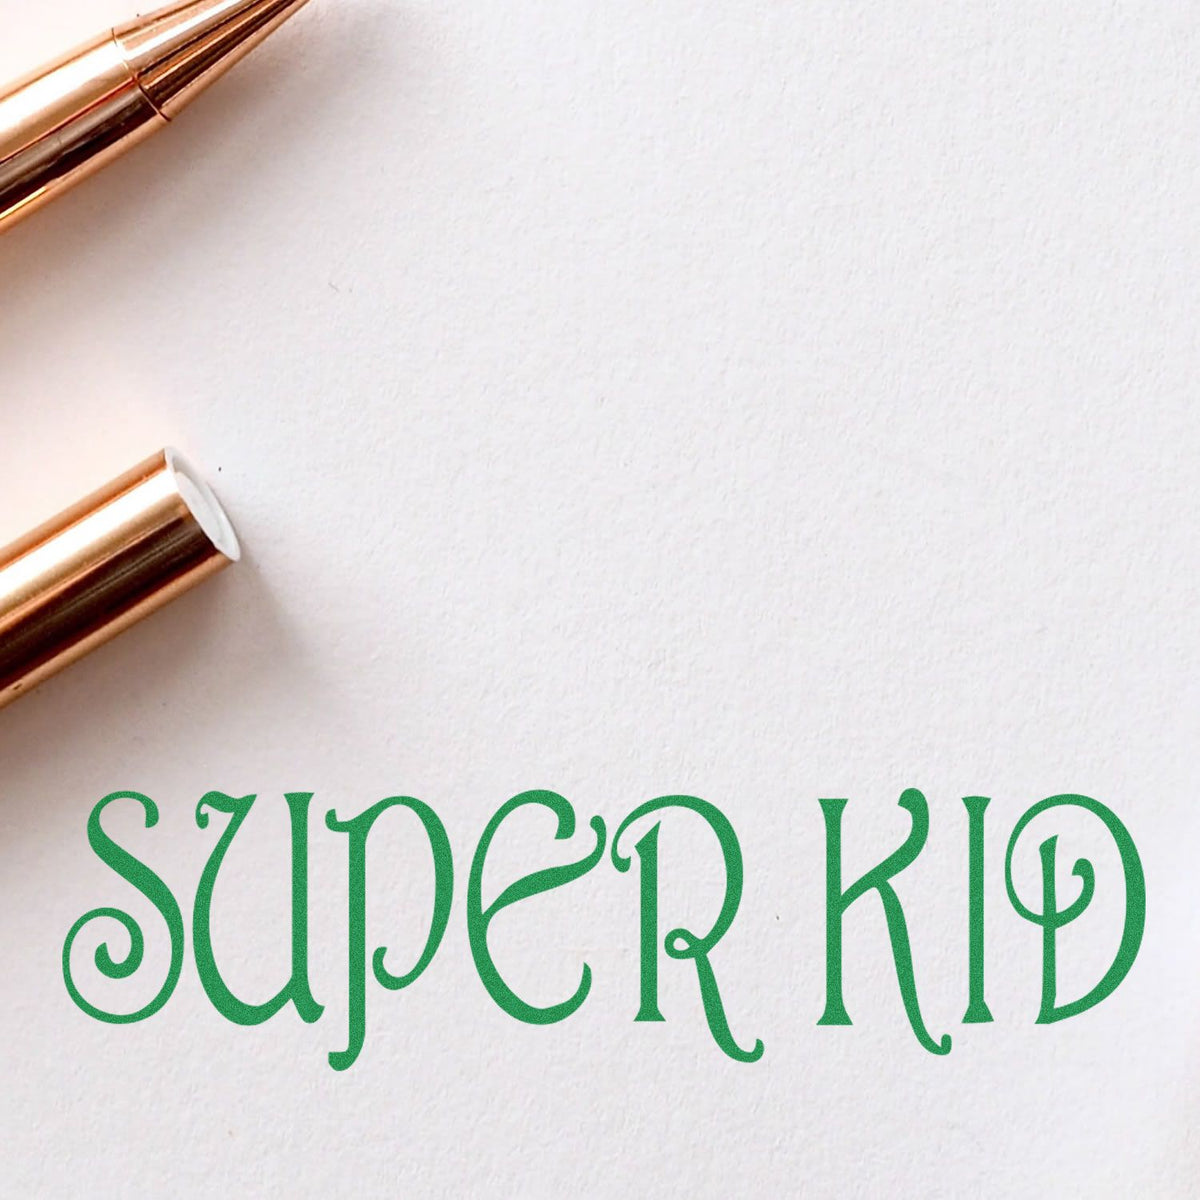 Large Self-Inking Super Kid Stamp In Use